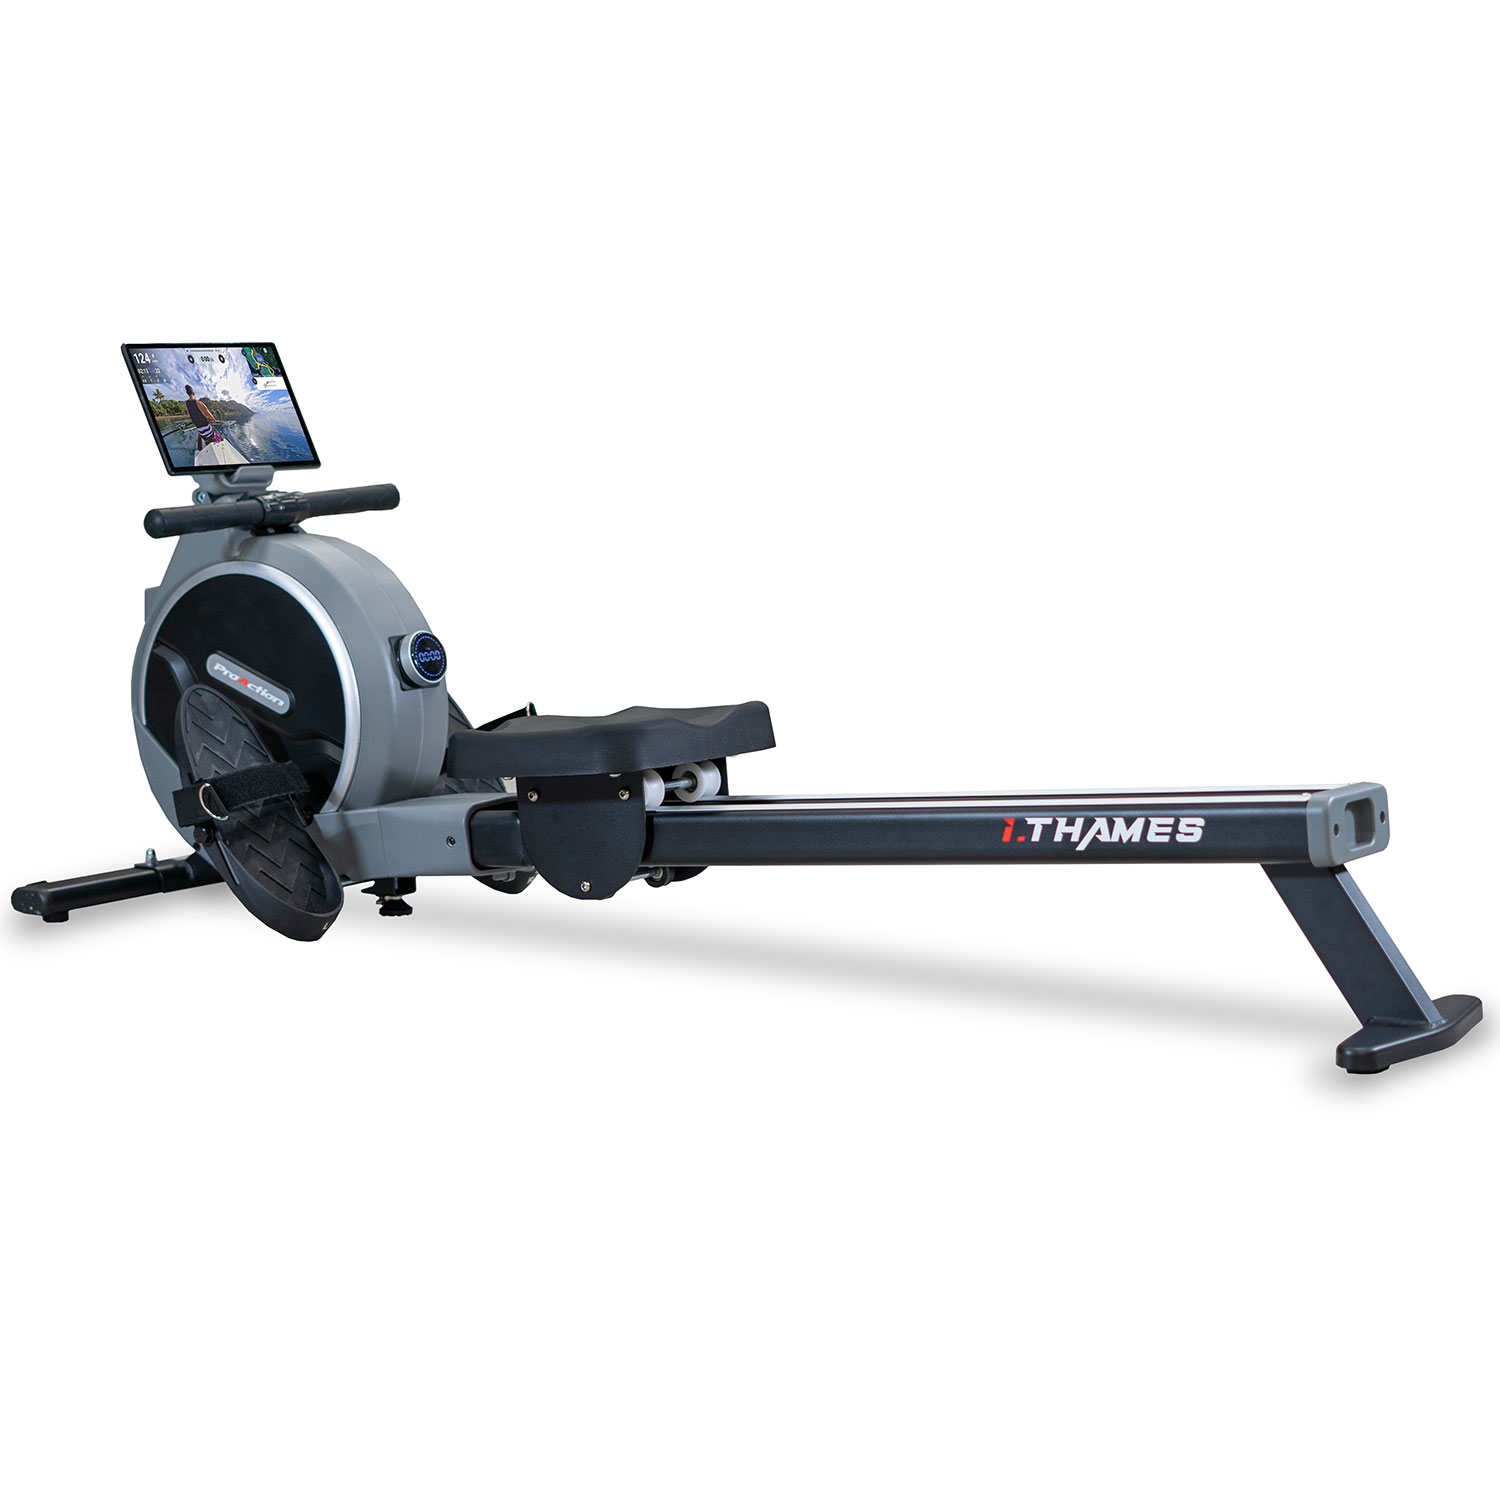 Remo Bh Fitness I.thames R311 Ftms